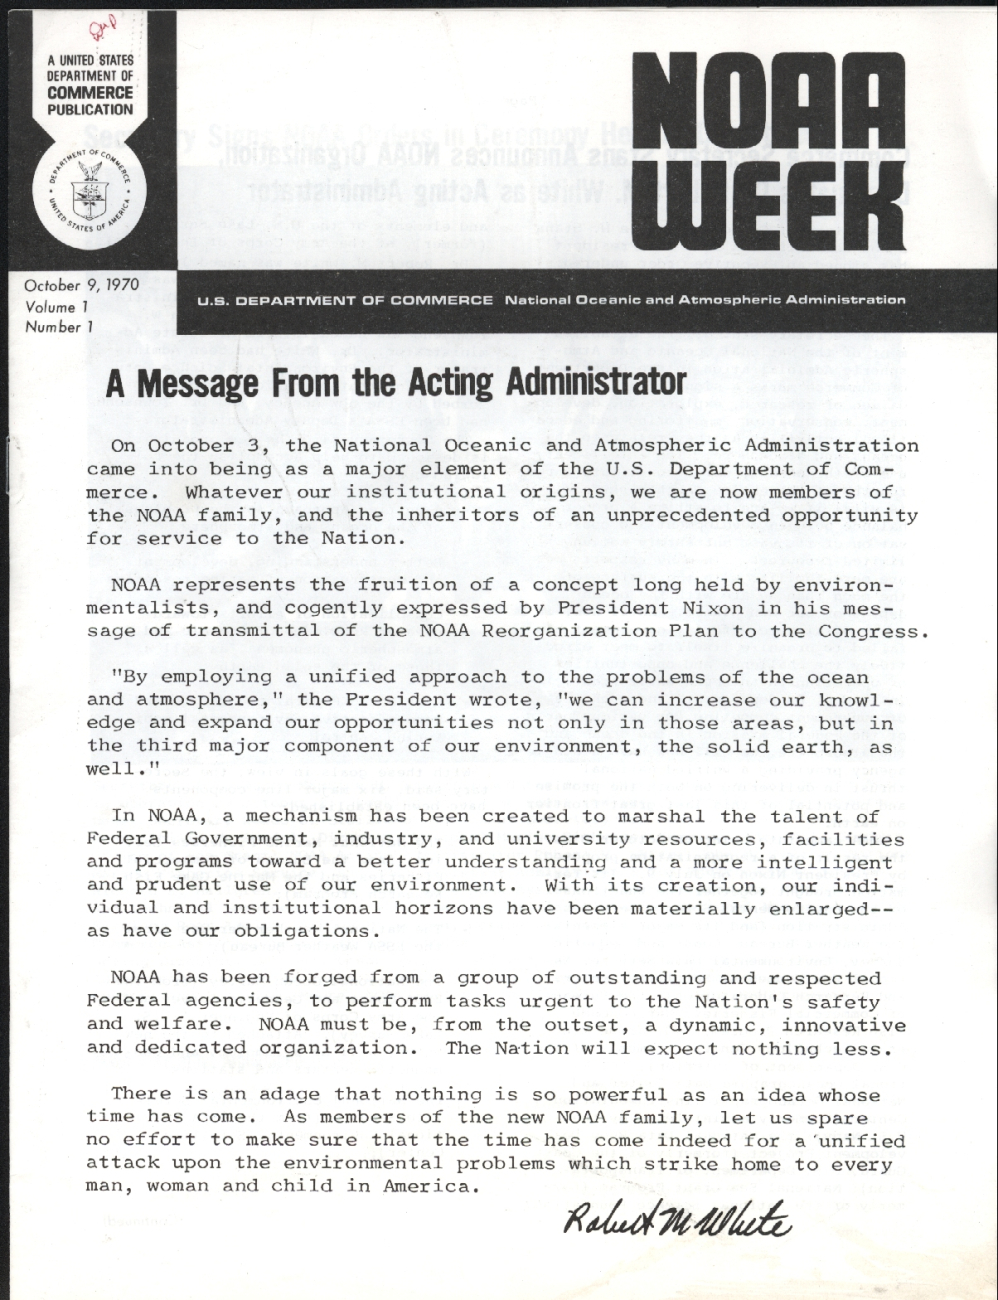 Letter from Robert White to NOAA employees upon formation of NOAA